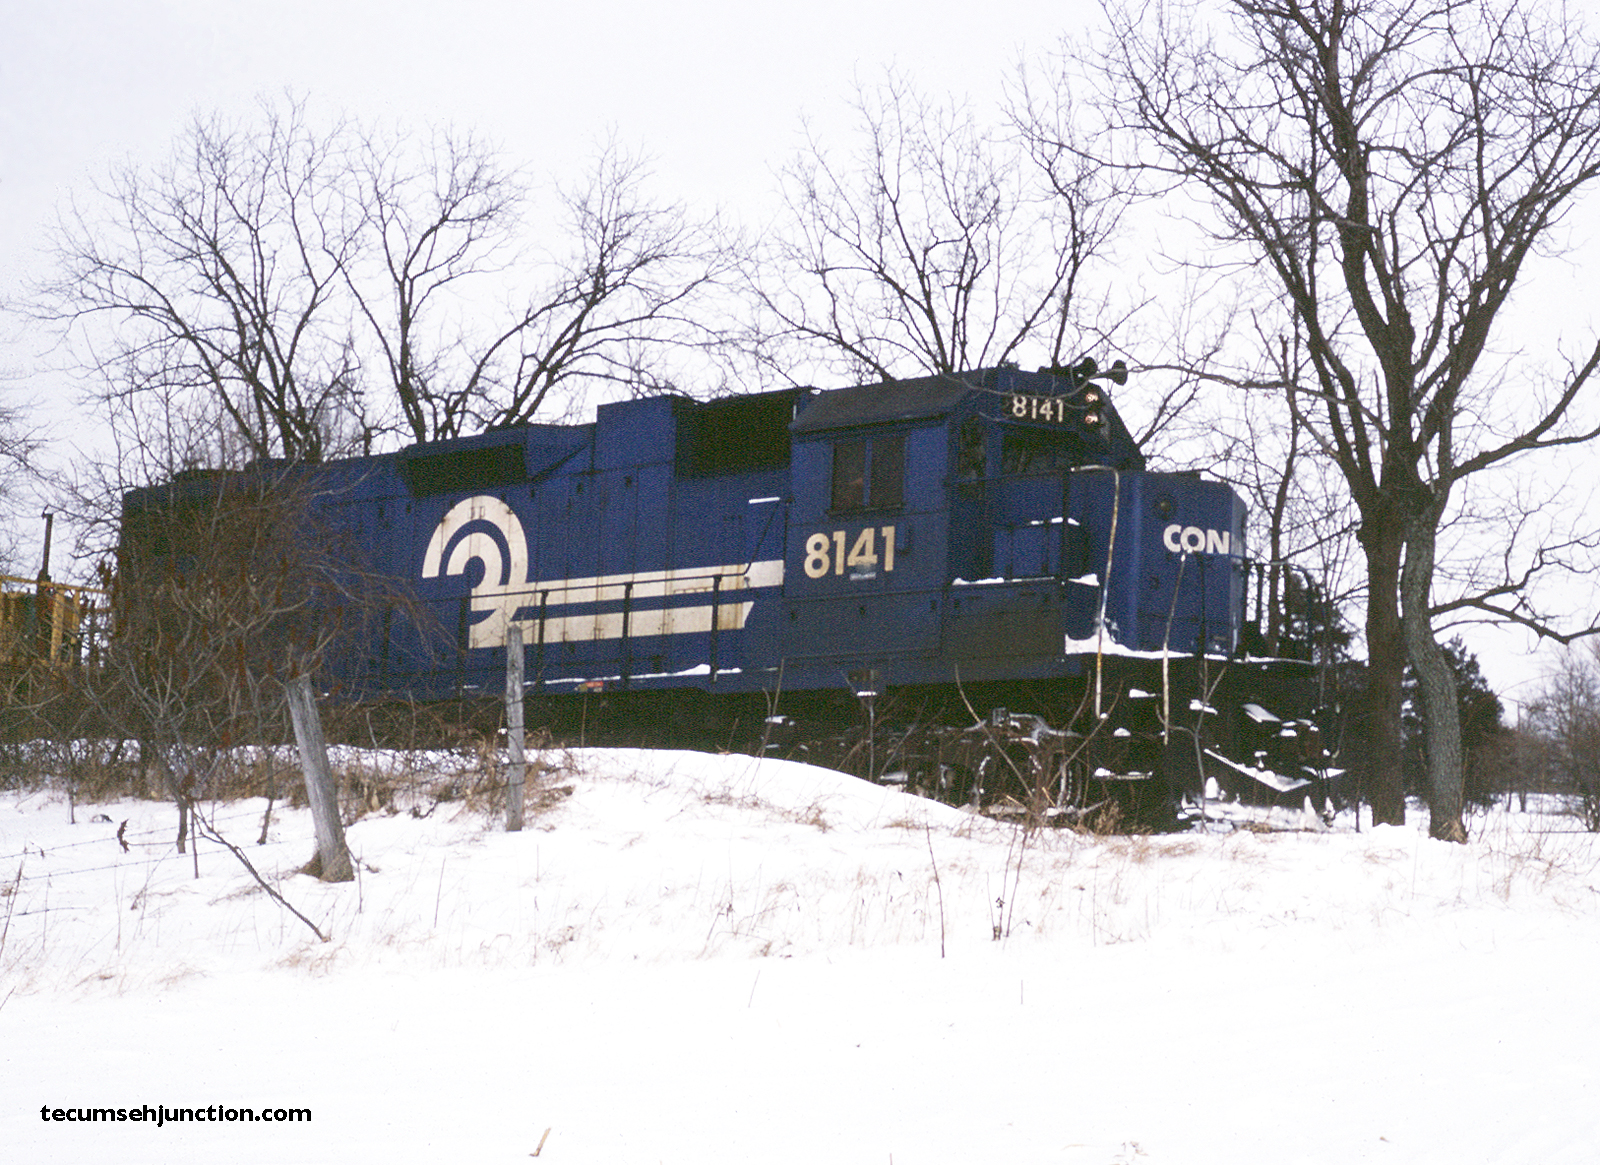 GP38-2 #8141 was the power for the plow extra, seen here near Chase Road.